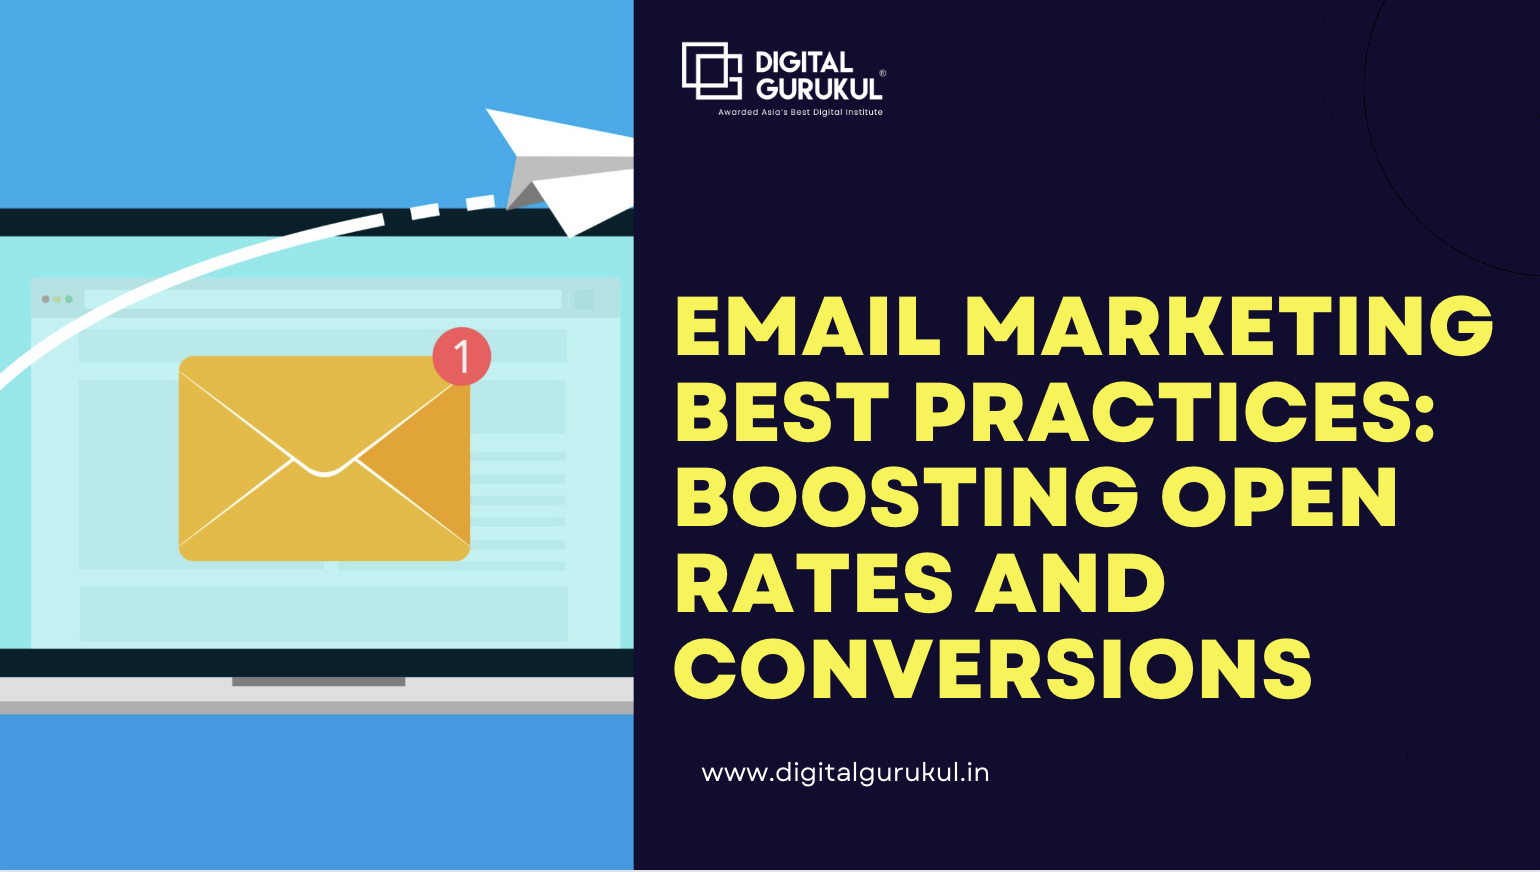 Email Marketing Best Practices: Boosting Open Rates and Conversions